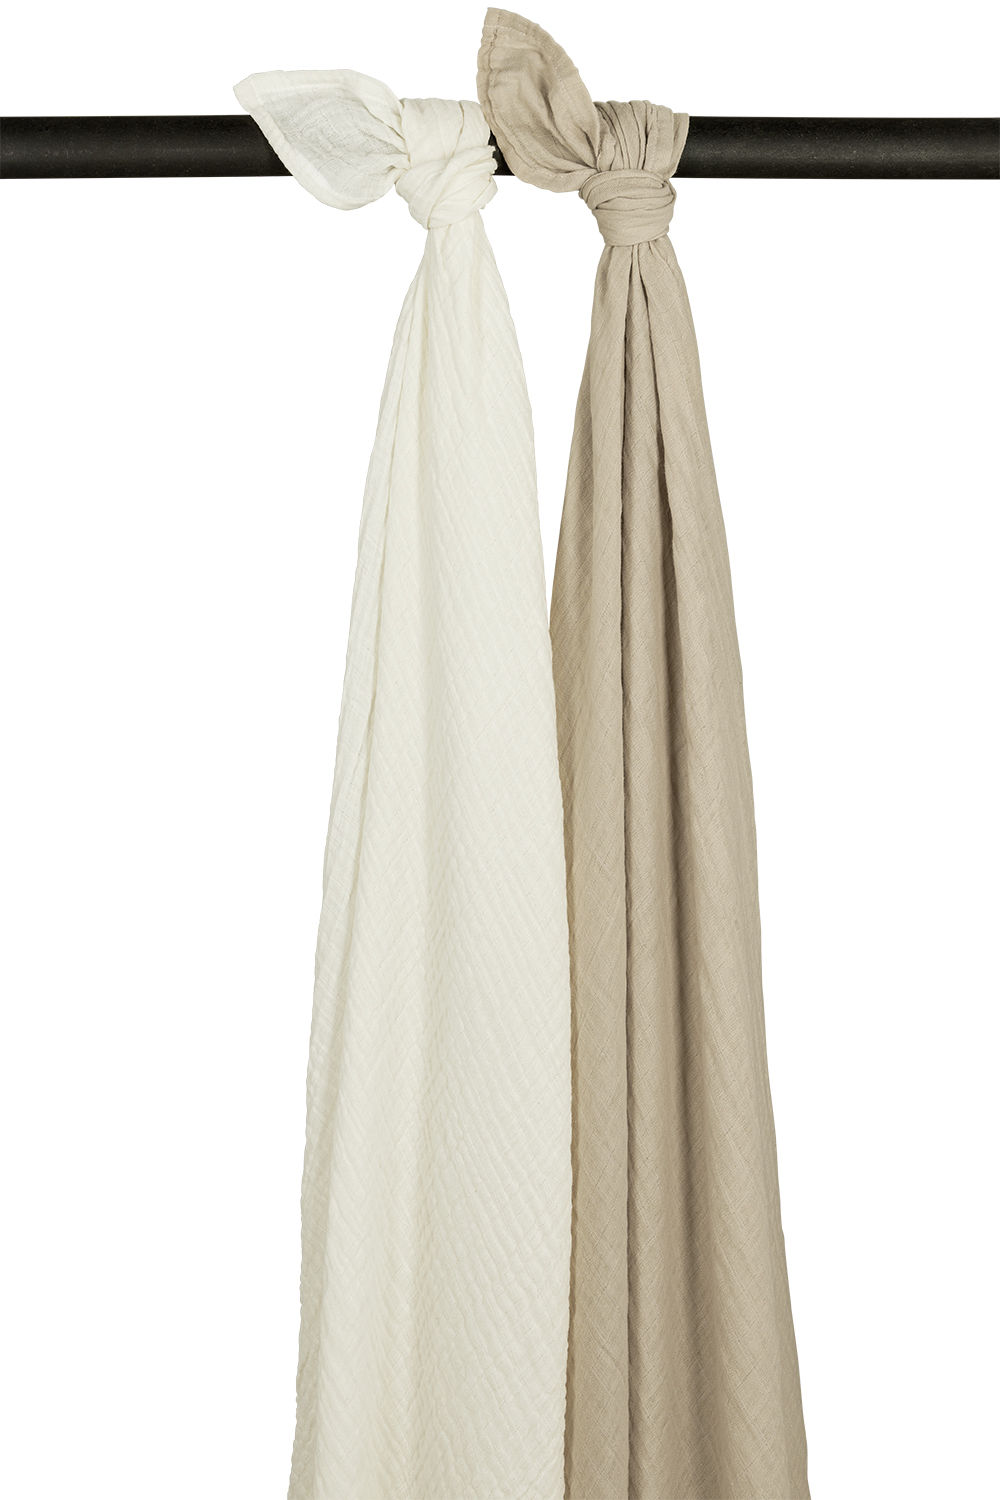 Swaddle  2er pack pre-washed musselin Uni - offwhite/sand - 120x120cm